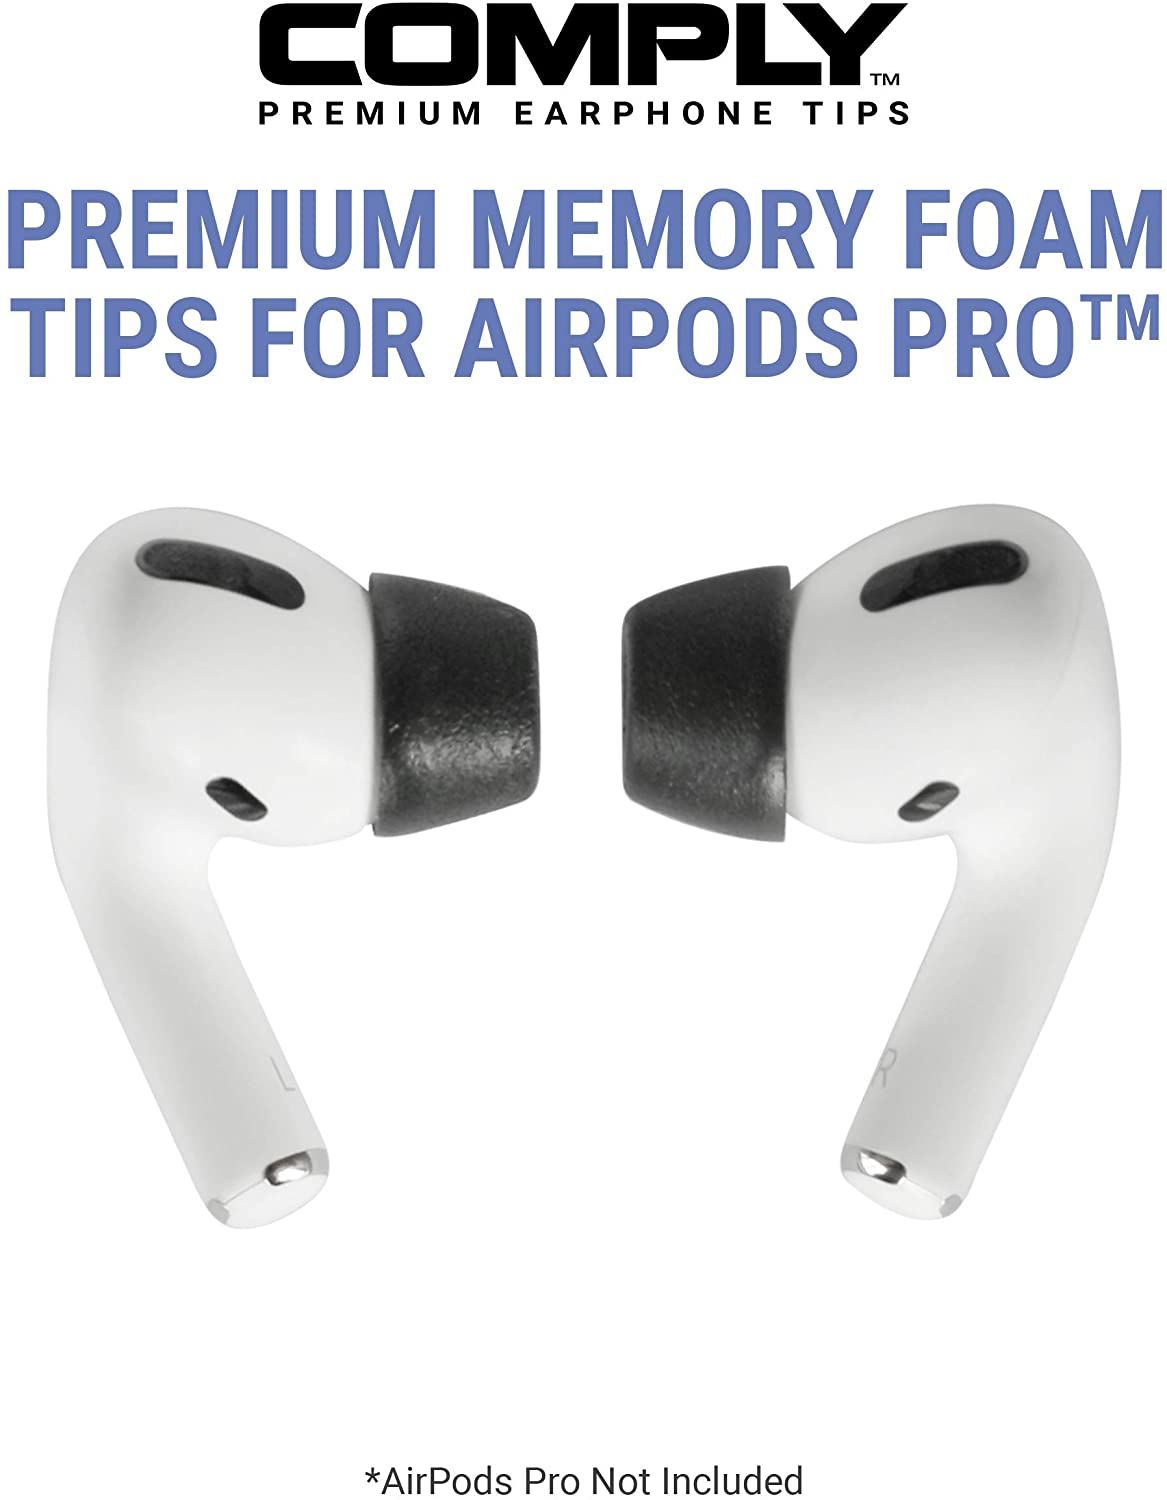 Comply AirPods Pro Foam Ear Tips for apple